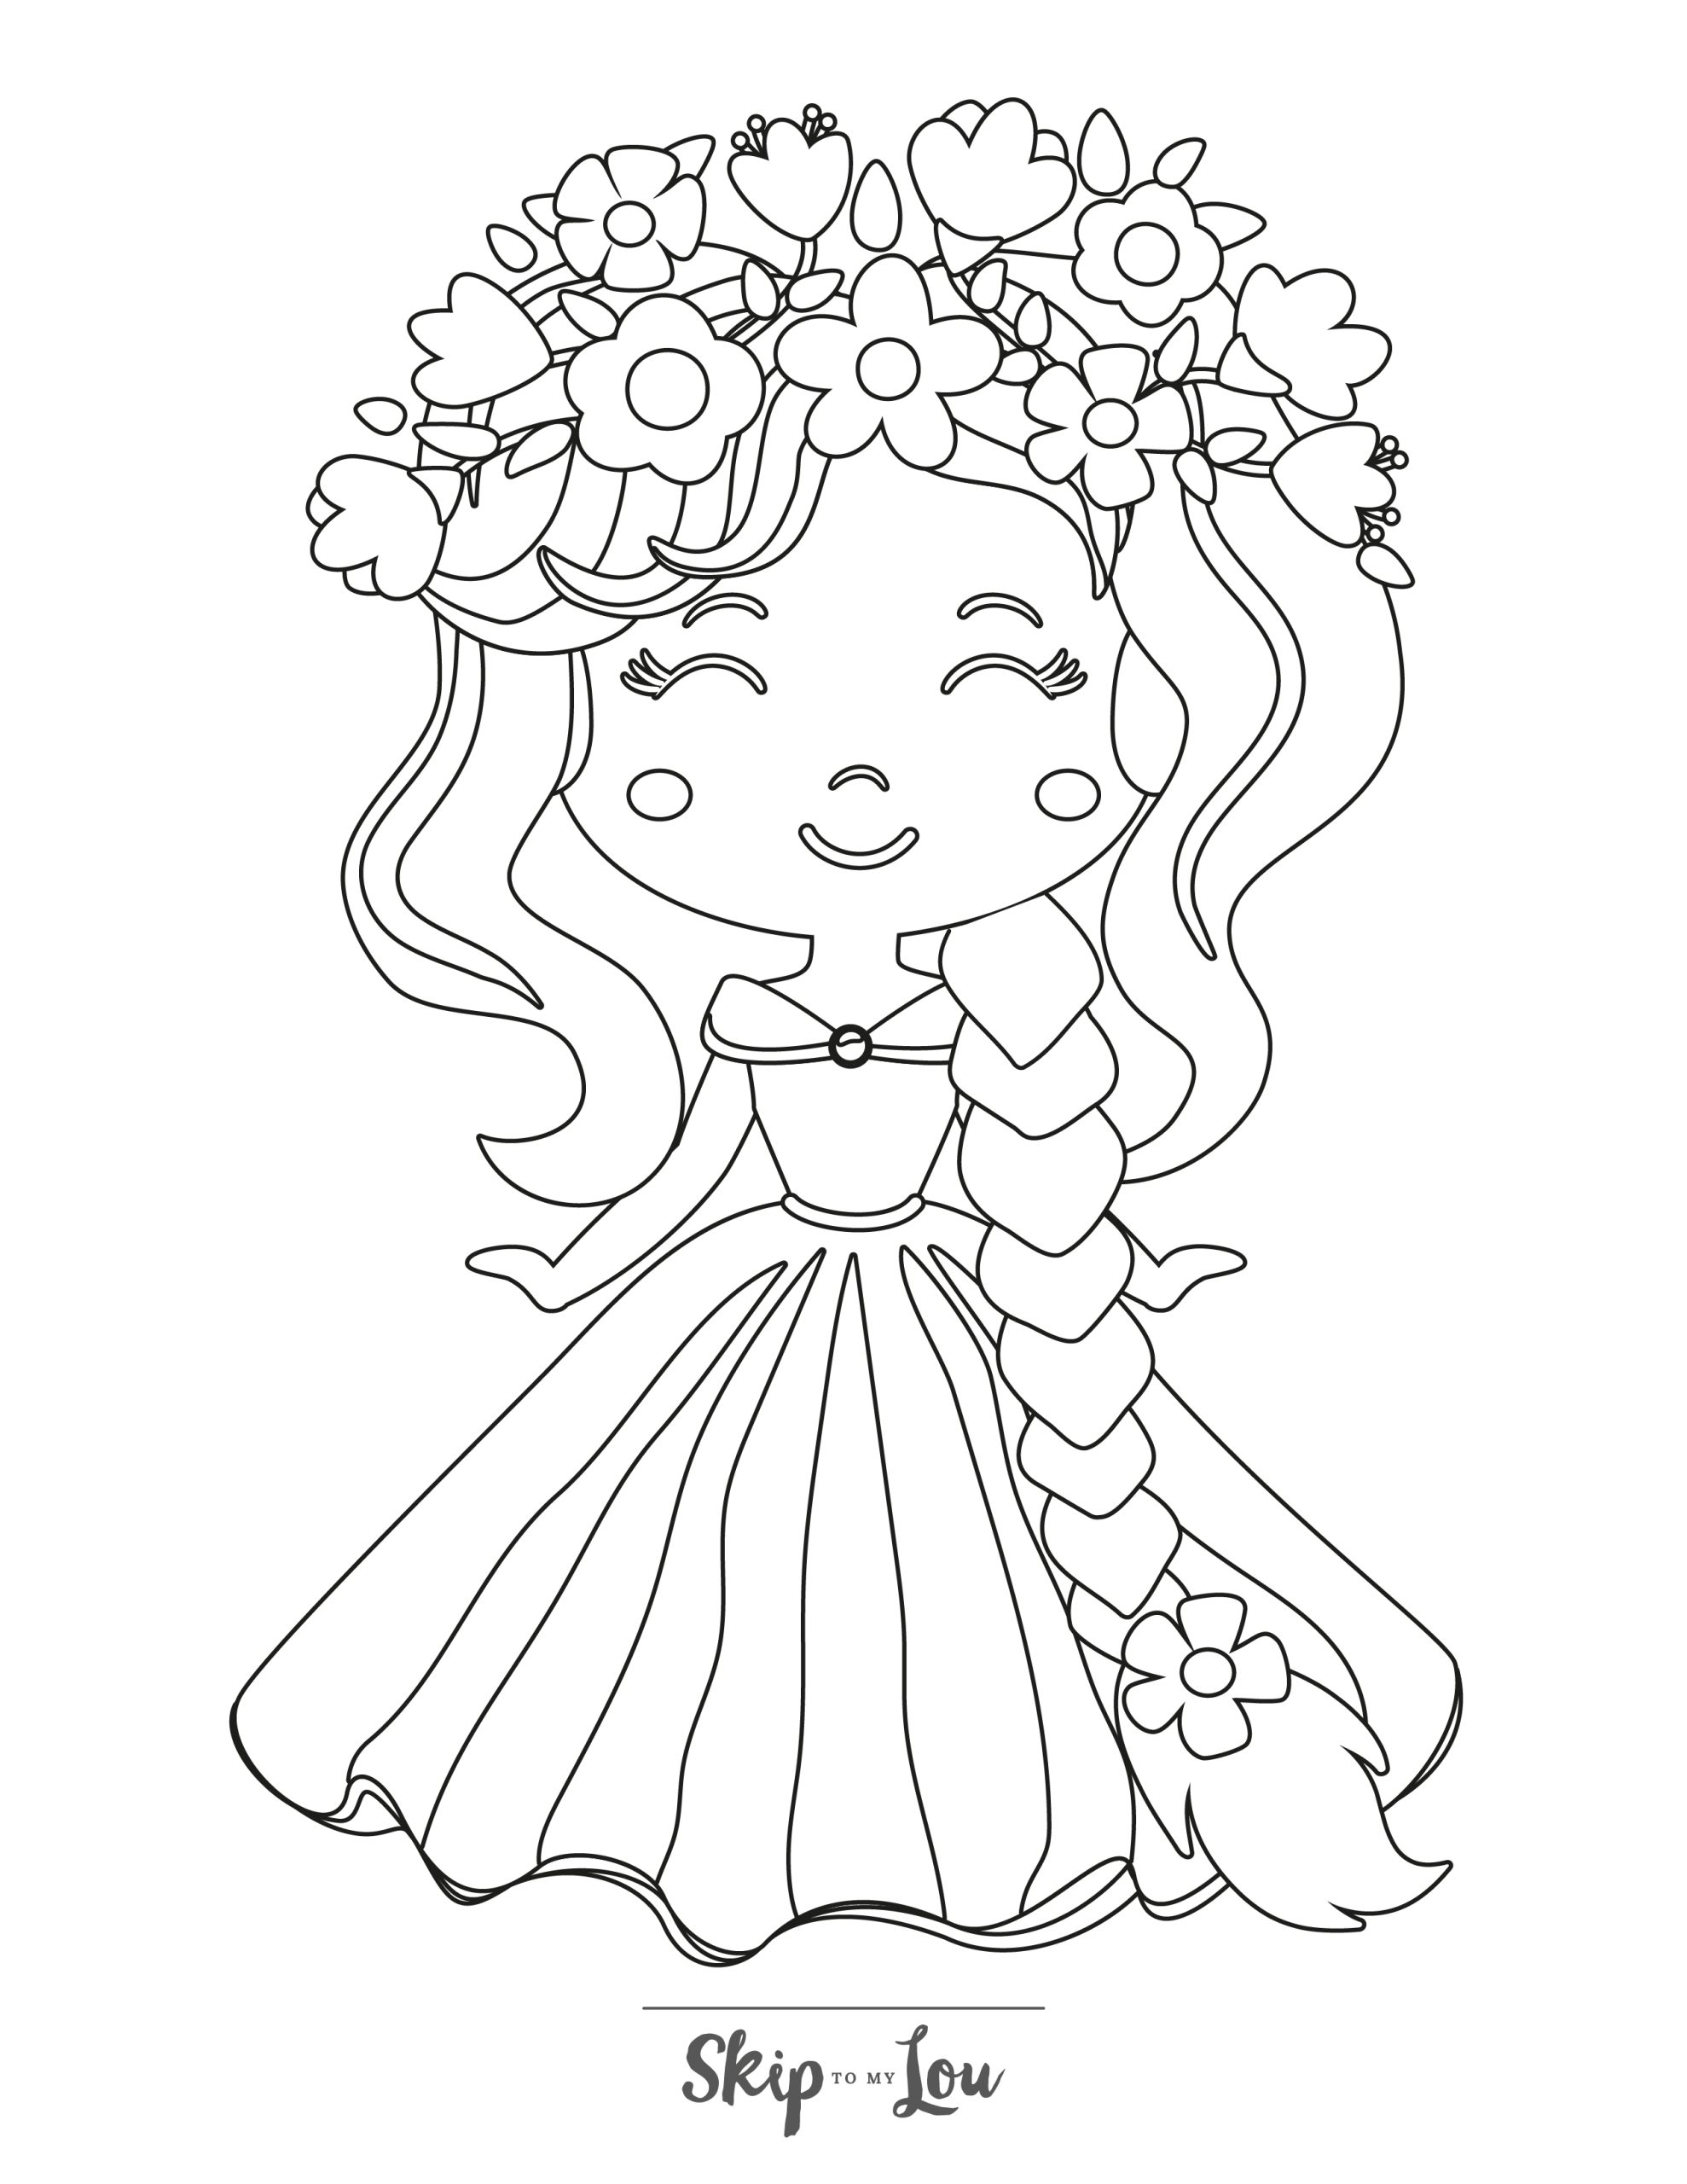 Rapunzel Coloring Page 10 - Line drawing of Rapunzel wearing a flowery headdress